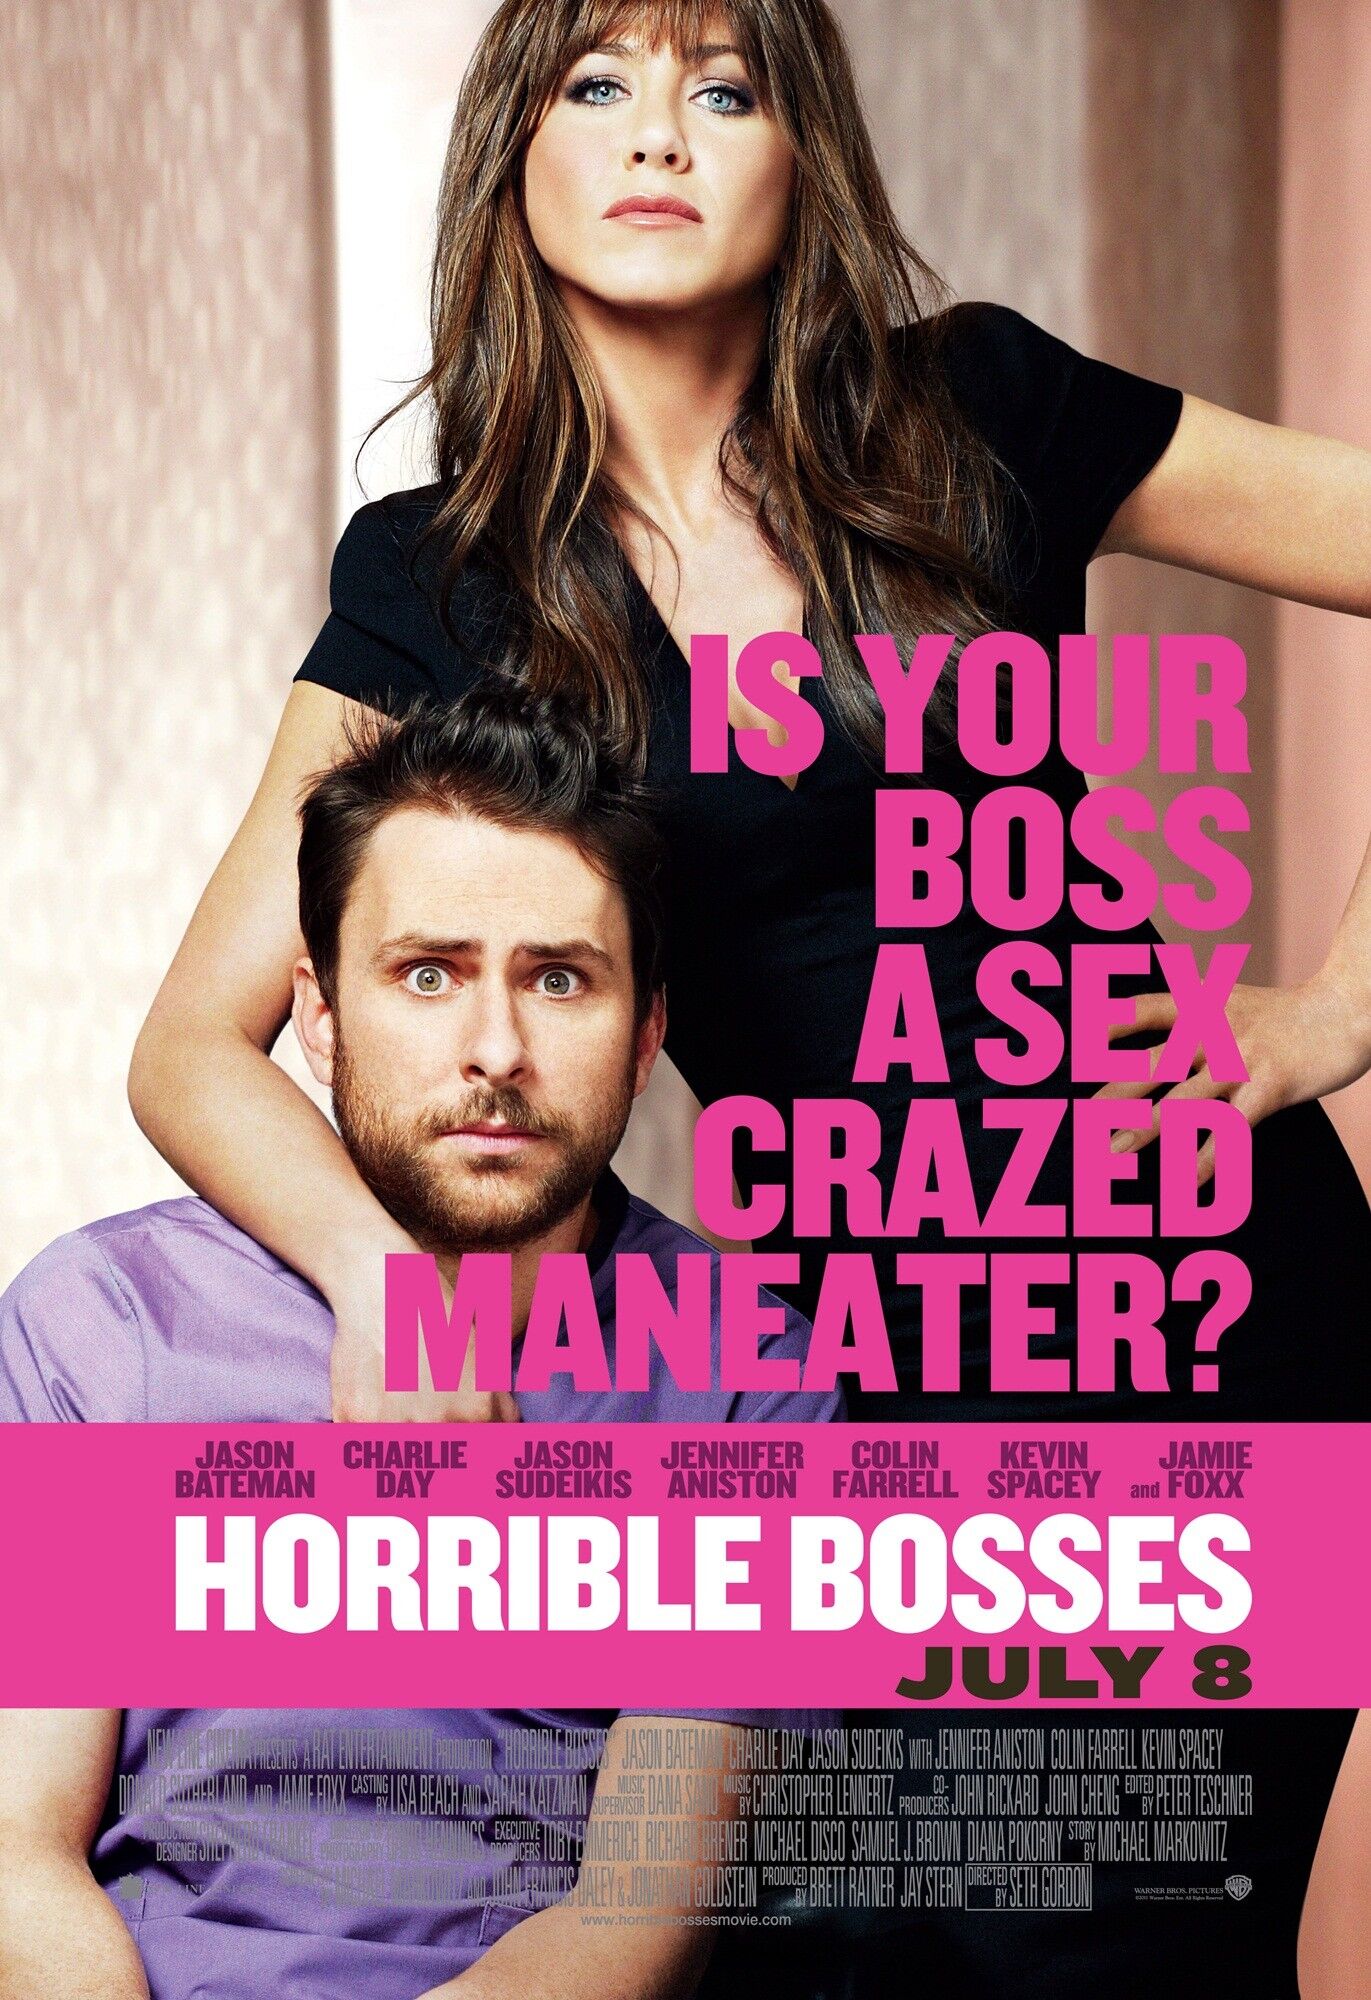 https://static.wikia.nocookie.net/scratchpad/images/f/f8/2011_-_Horrible_Bosses_Movie_Poster.jpg/revision/latest/scale-to-width-down/1371?cb=20140908152745